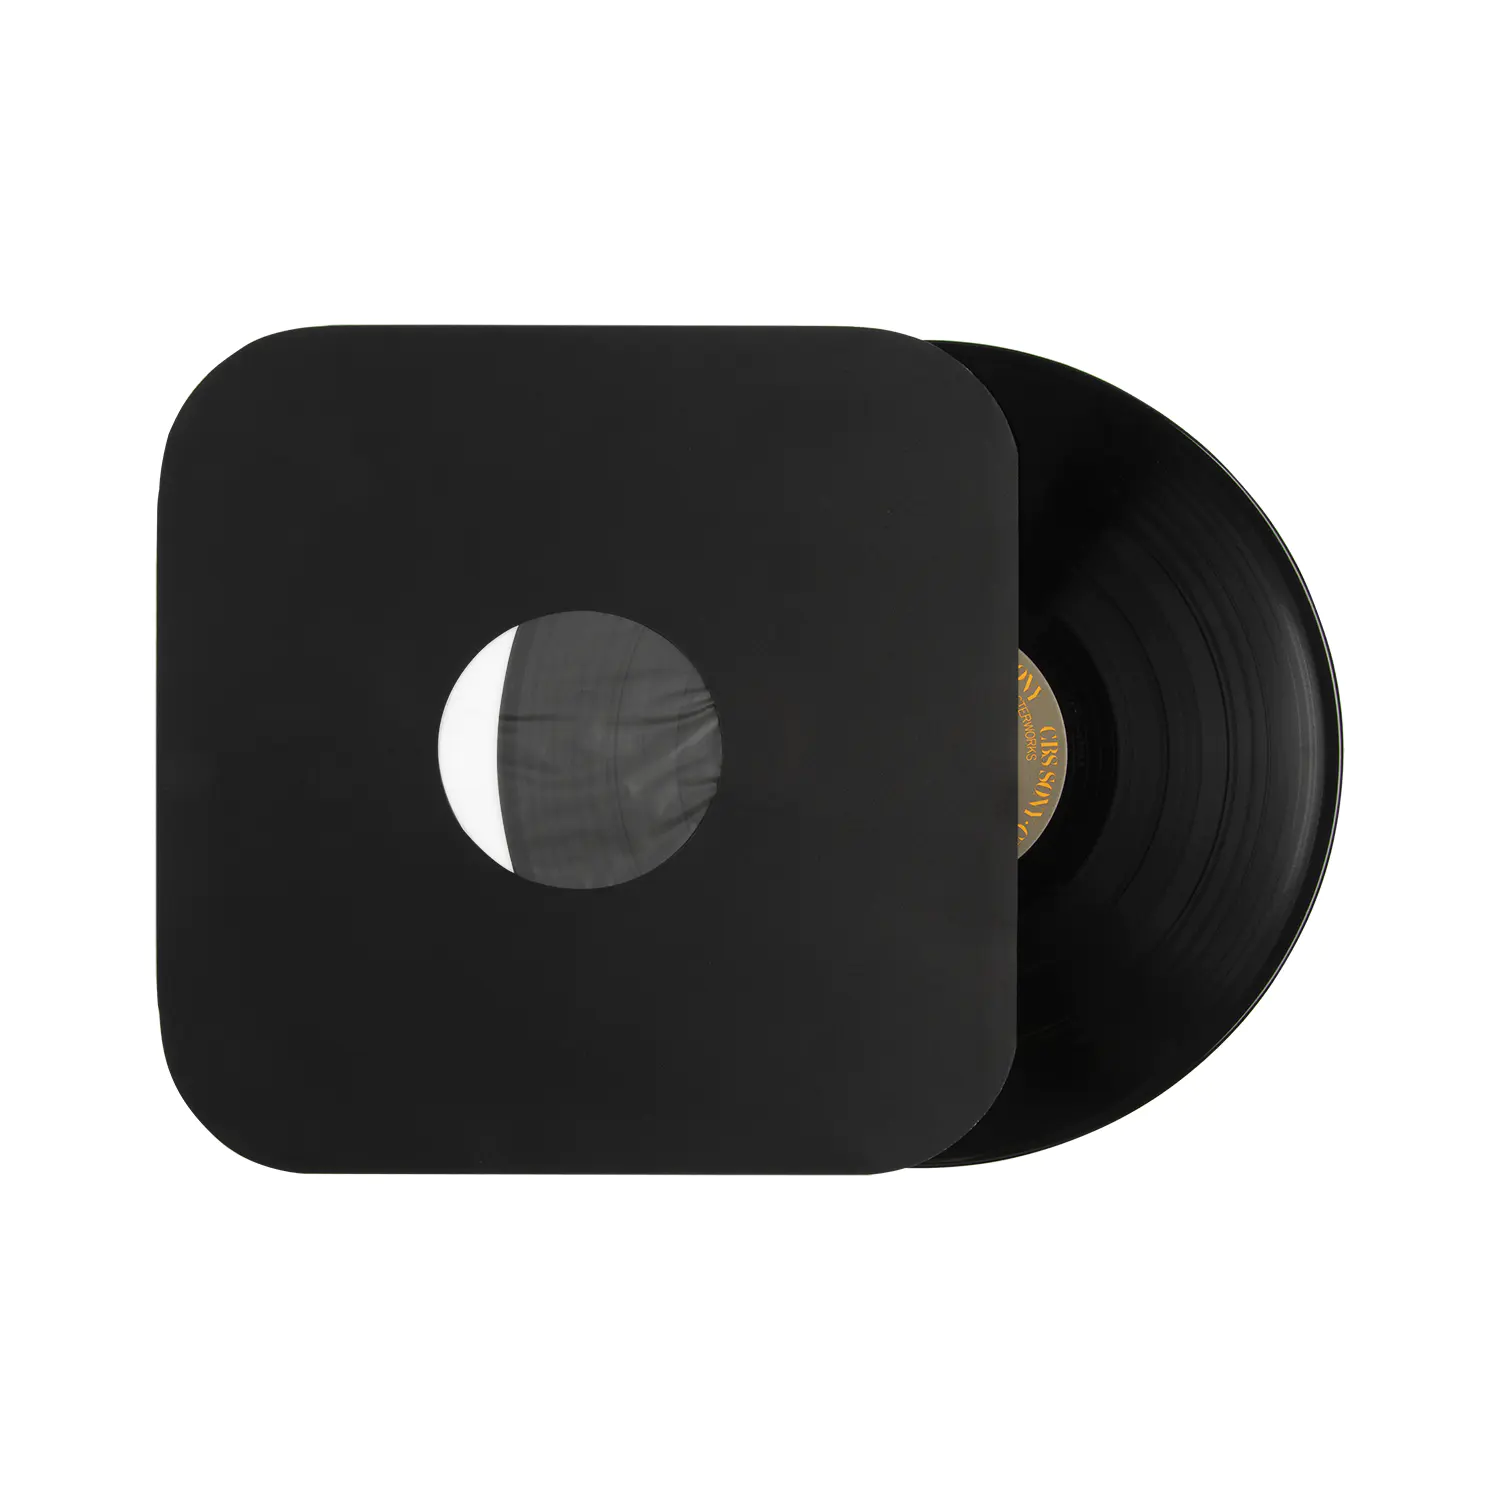 White/Black/Color Paper & Polylined LP Inner Sleeves with Round Corner